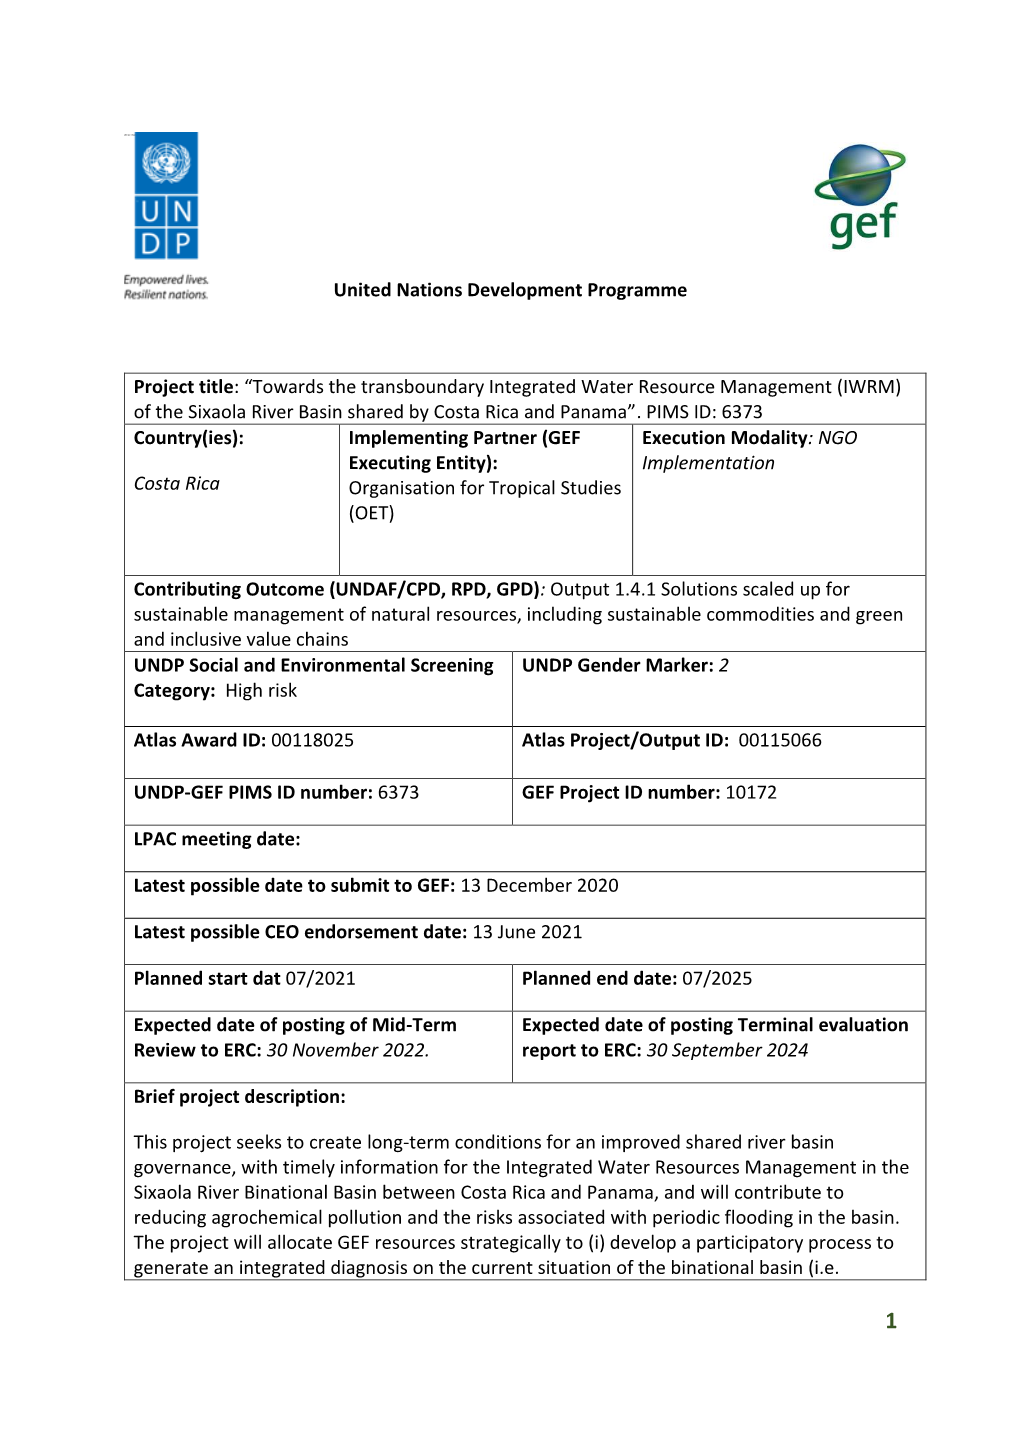 United Nations Development Programme Project Title